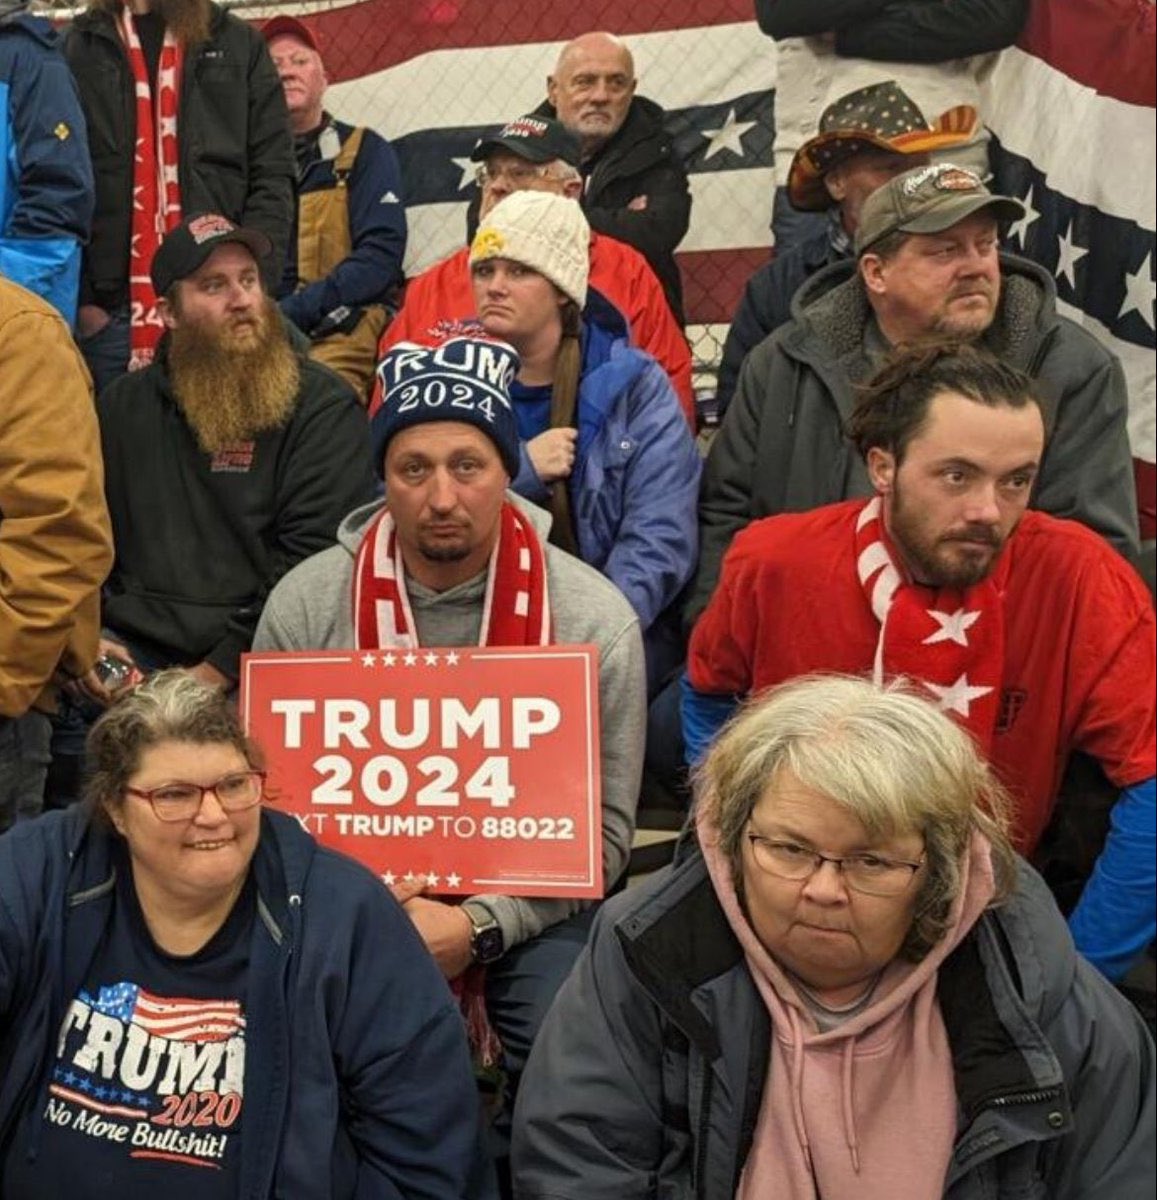 These are the real #Trumpers